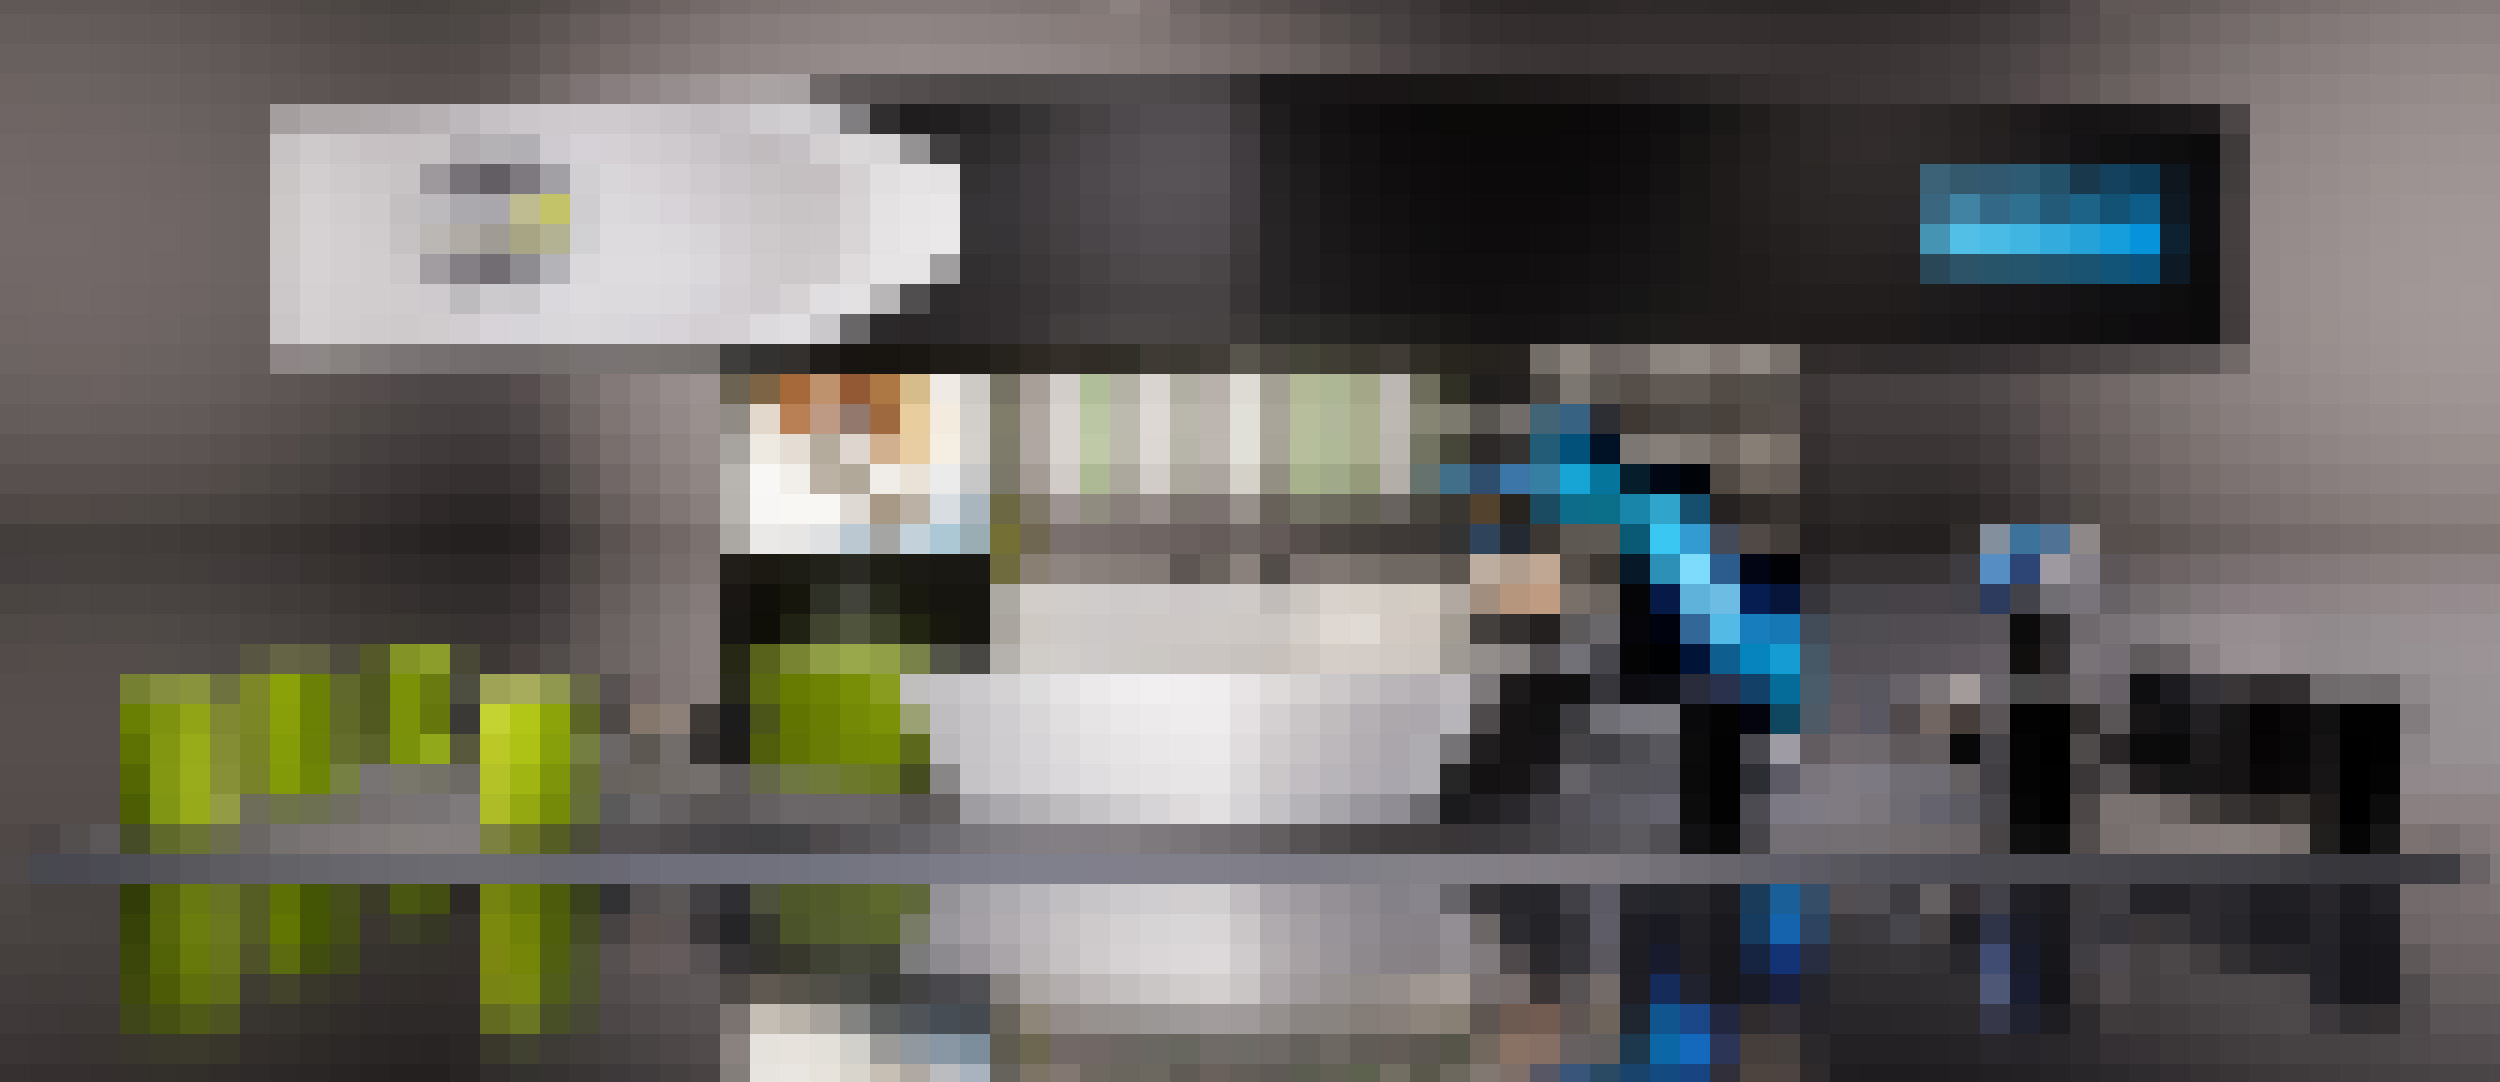 Formnext 2022, Pixelated booth.jpg